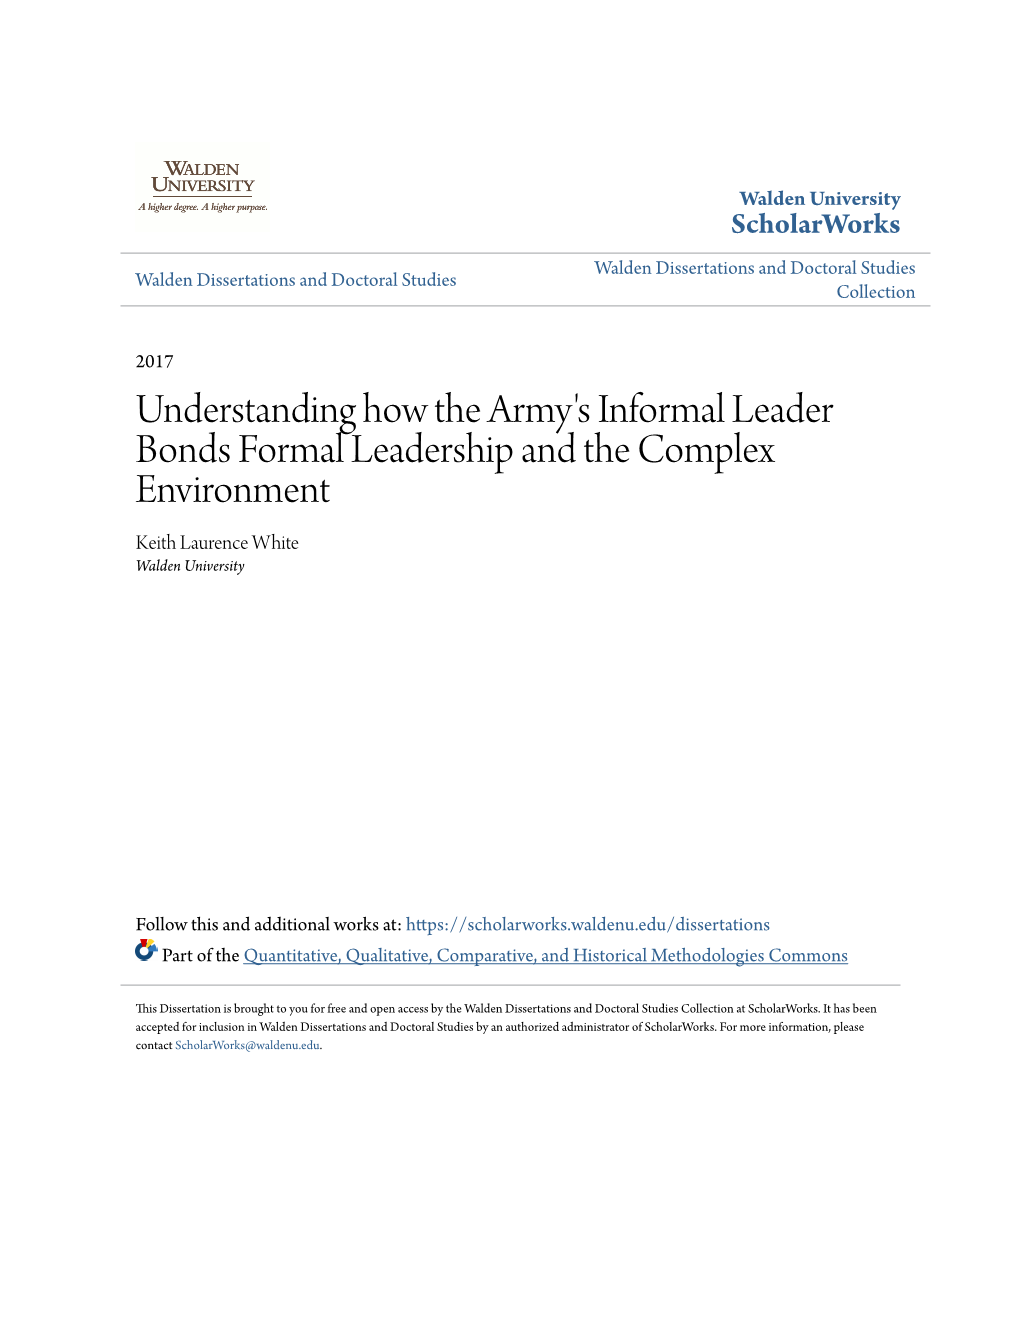 Understanding How the Army's Informal Leader Bonds Formal Leadership and the Complex Environment Keith Laurence White Walden University